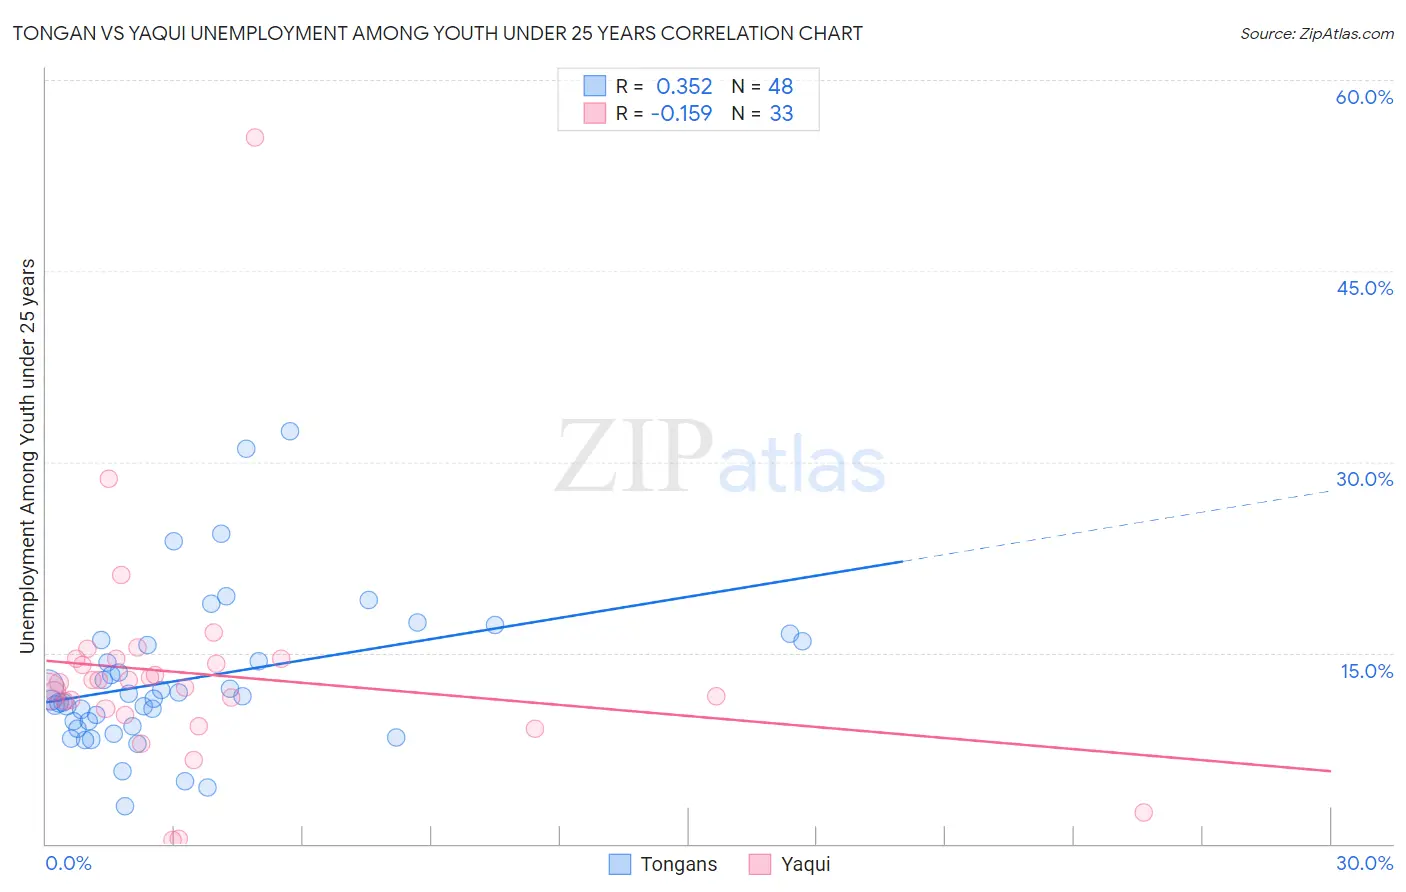 Tongan vs Yaqui Unemployment Among Youth under 25 years